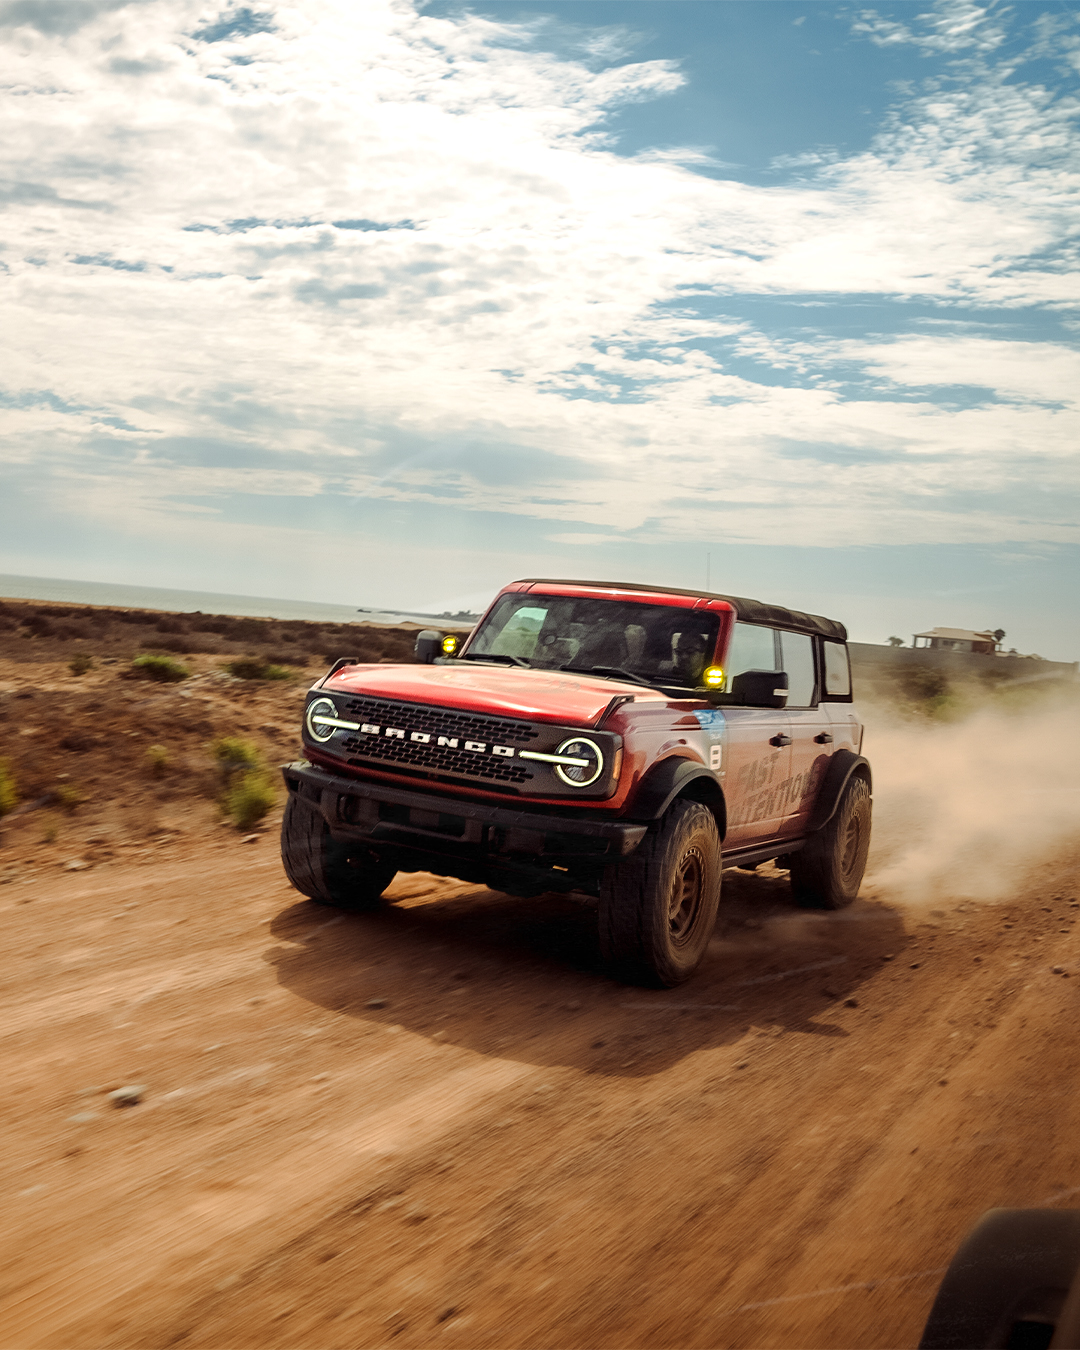 Ford Bronco Fast Intentions Inc. w/ Expedition X Offroad @ Baja, Mexico (lots of photos) EXO OFF ROAD 9